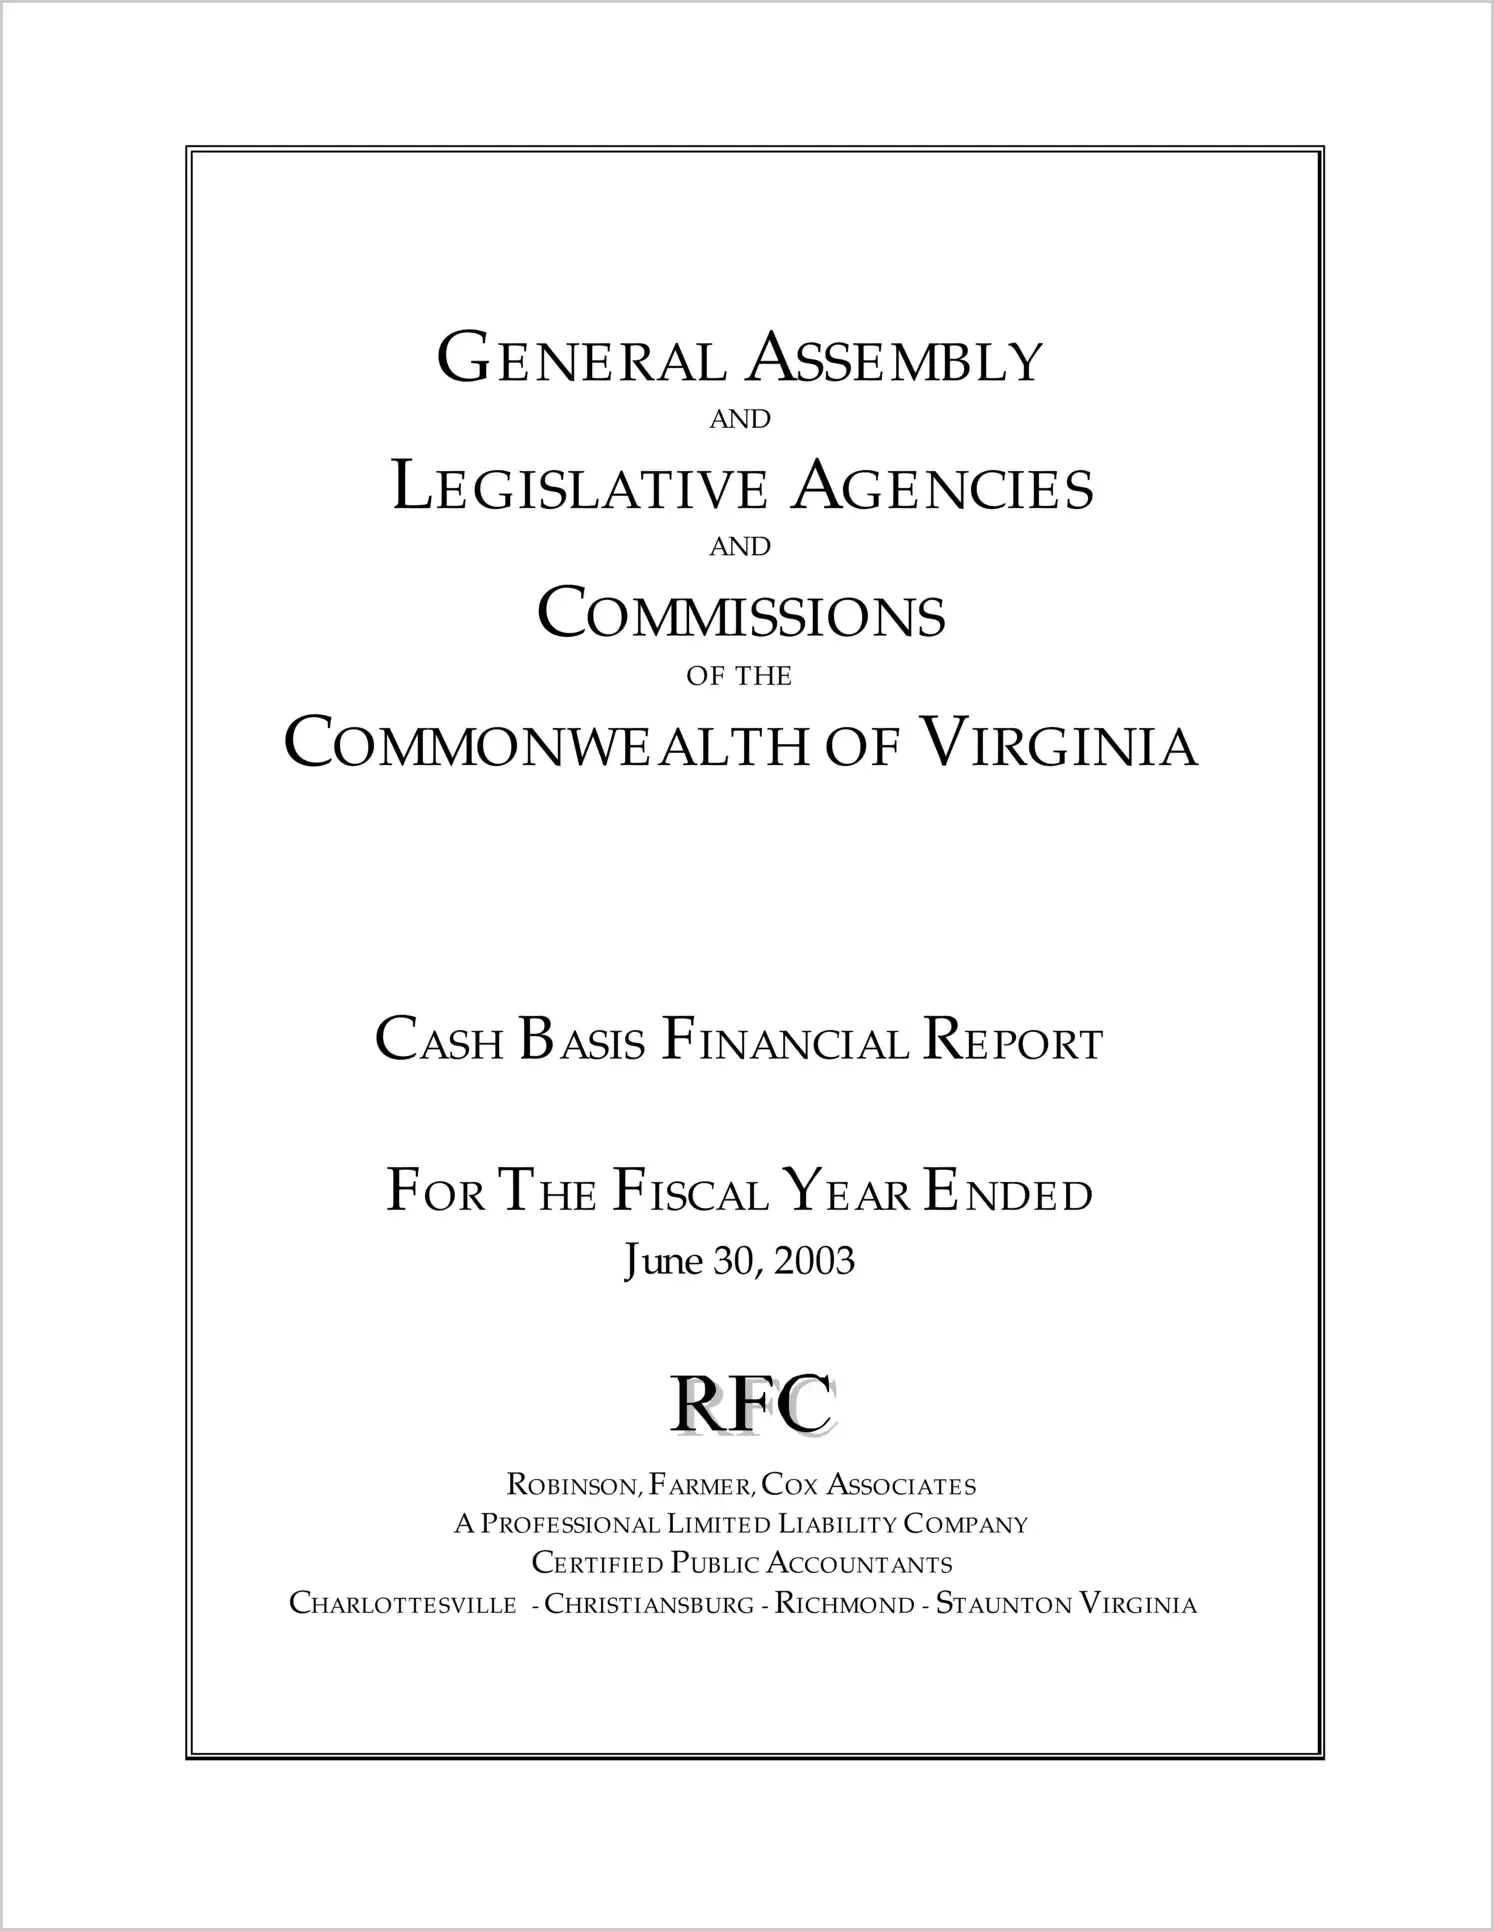 General Assembly and Legislative Agencies and Commissions of the Commonwealth of Virginia Cash Basis Financial Report For The Fiscal Year ended June 30, 2003